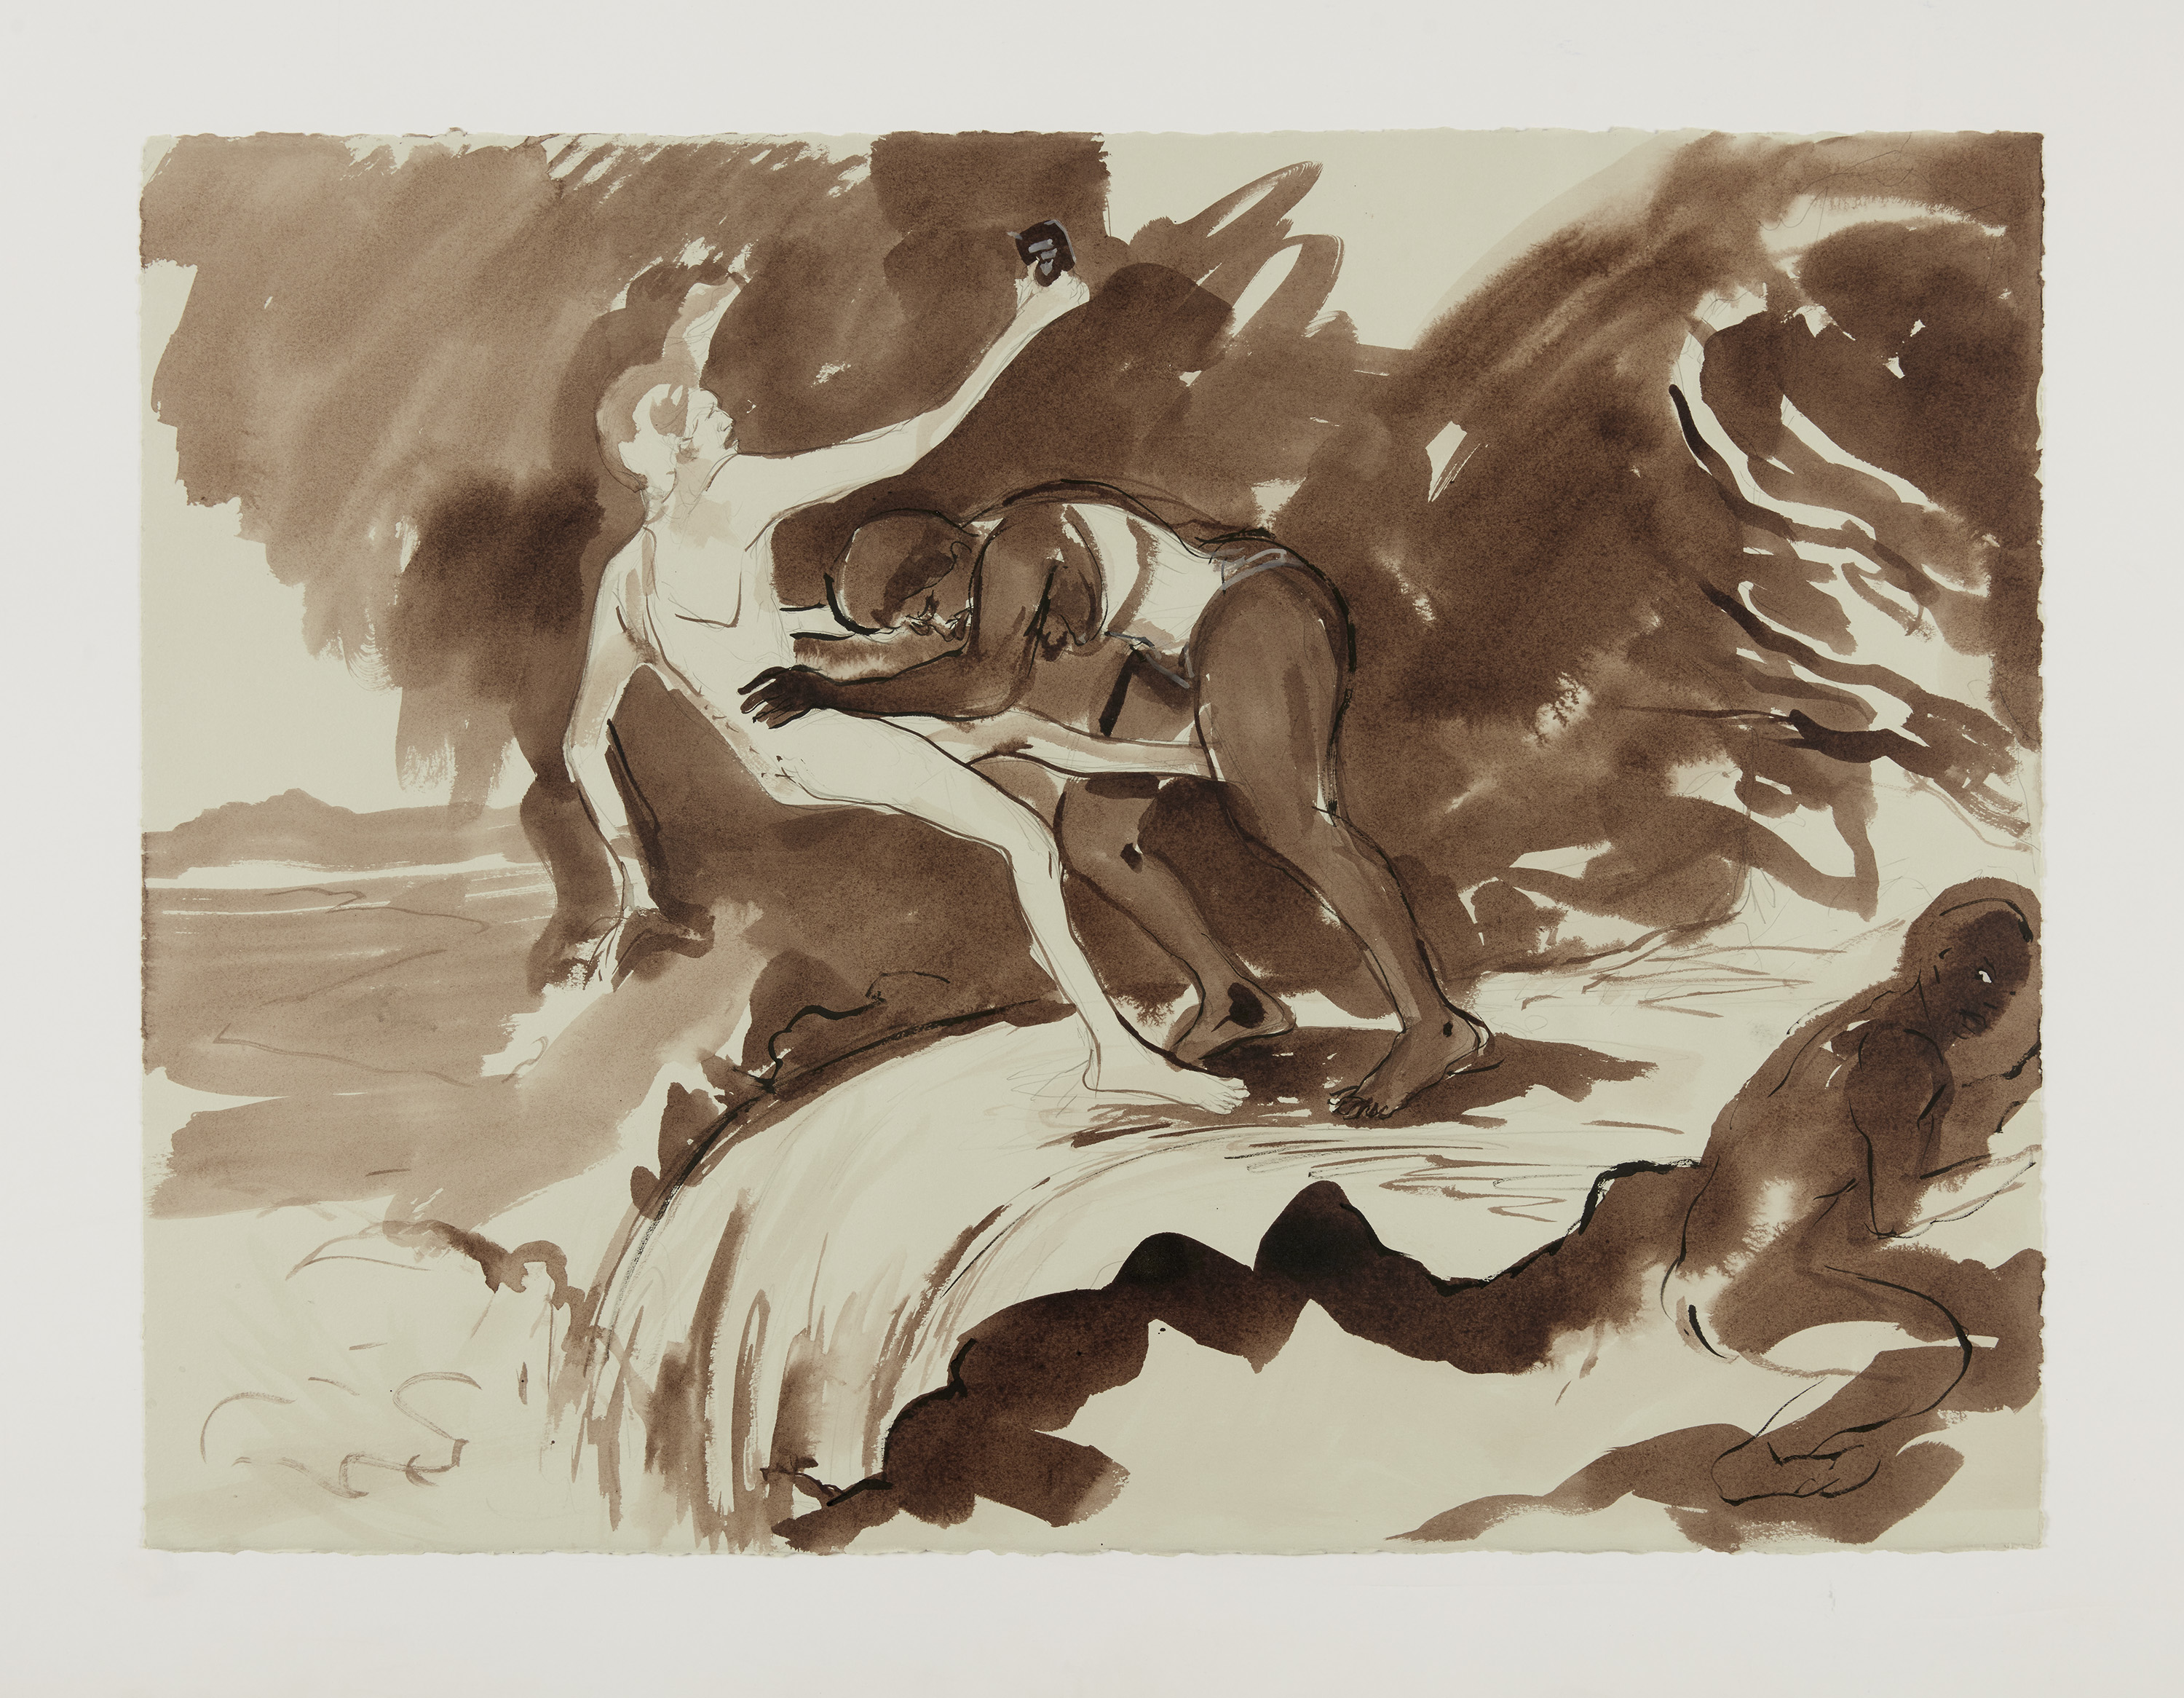 Kara Walker, Just be done with it, 2020, graphite, watercolor, gouache, sumi-e ink on paper, 22 1/2 x 30 in framed. Courtesy the artist and Sikkema Jenkins & Co.